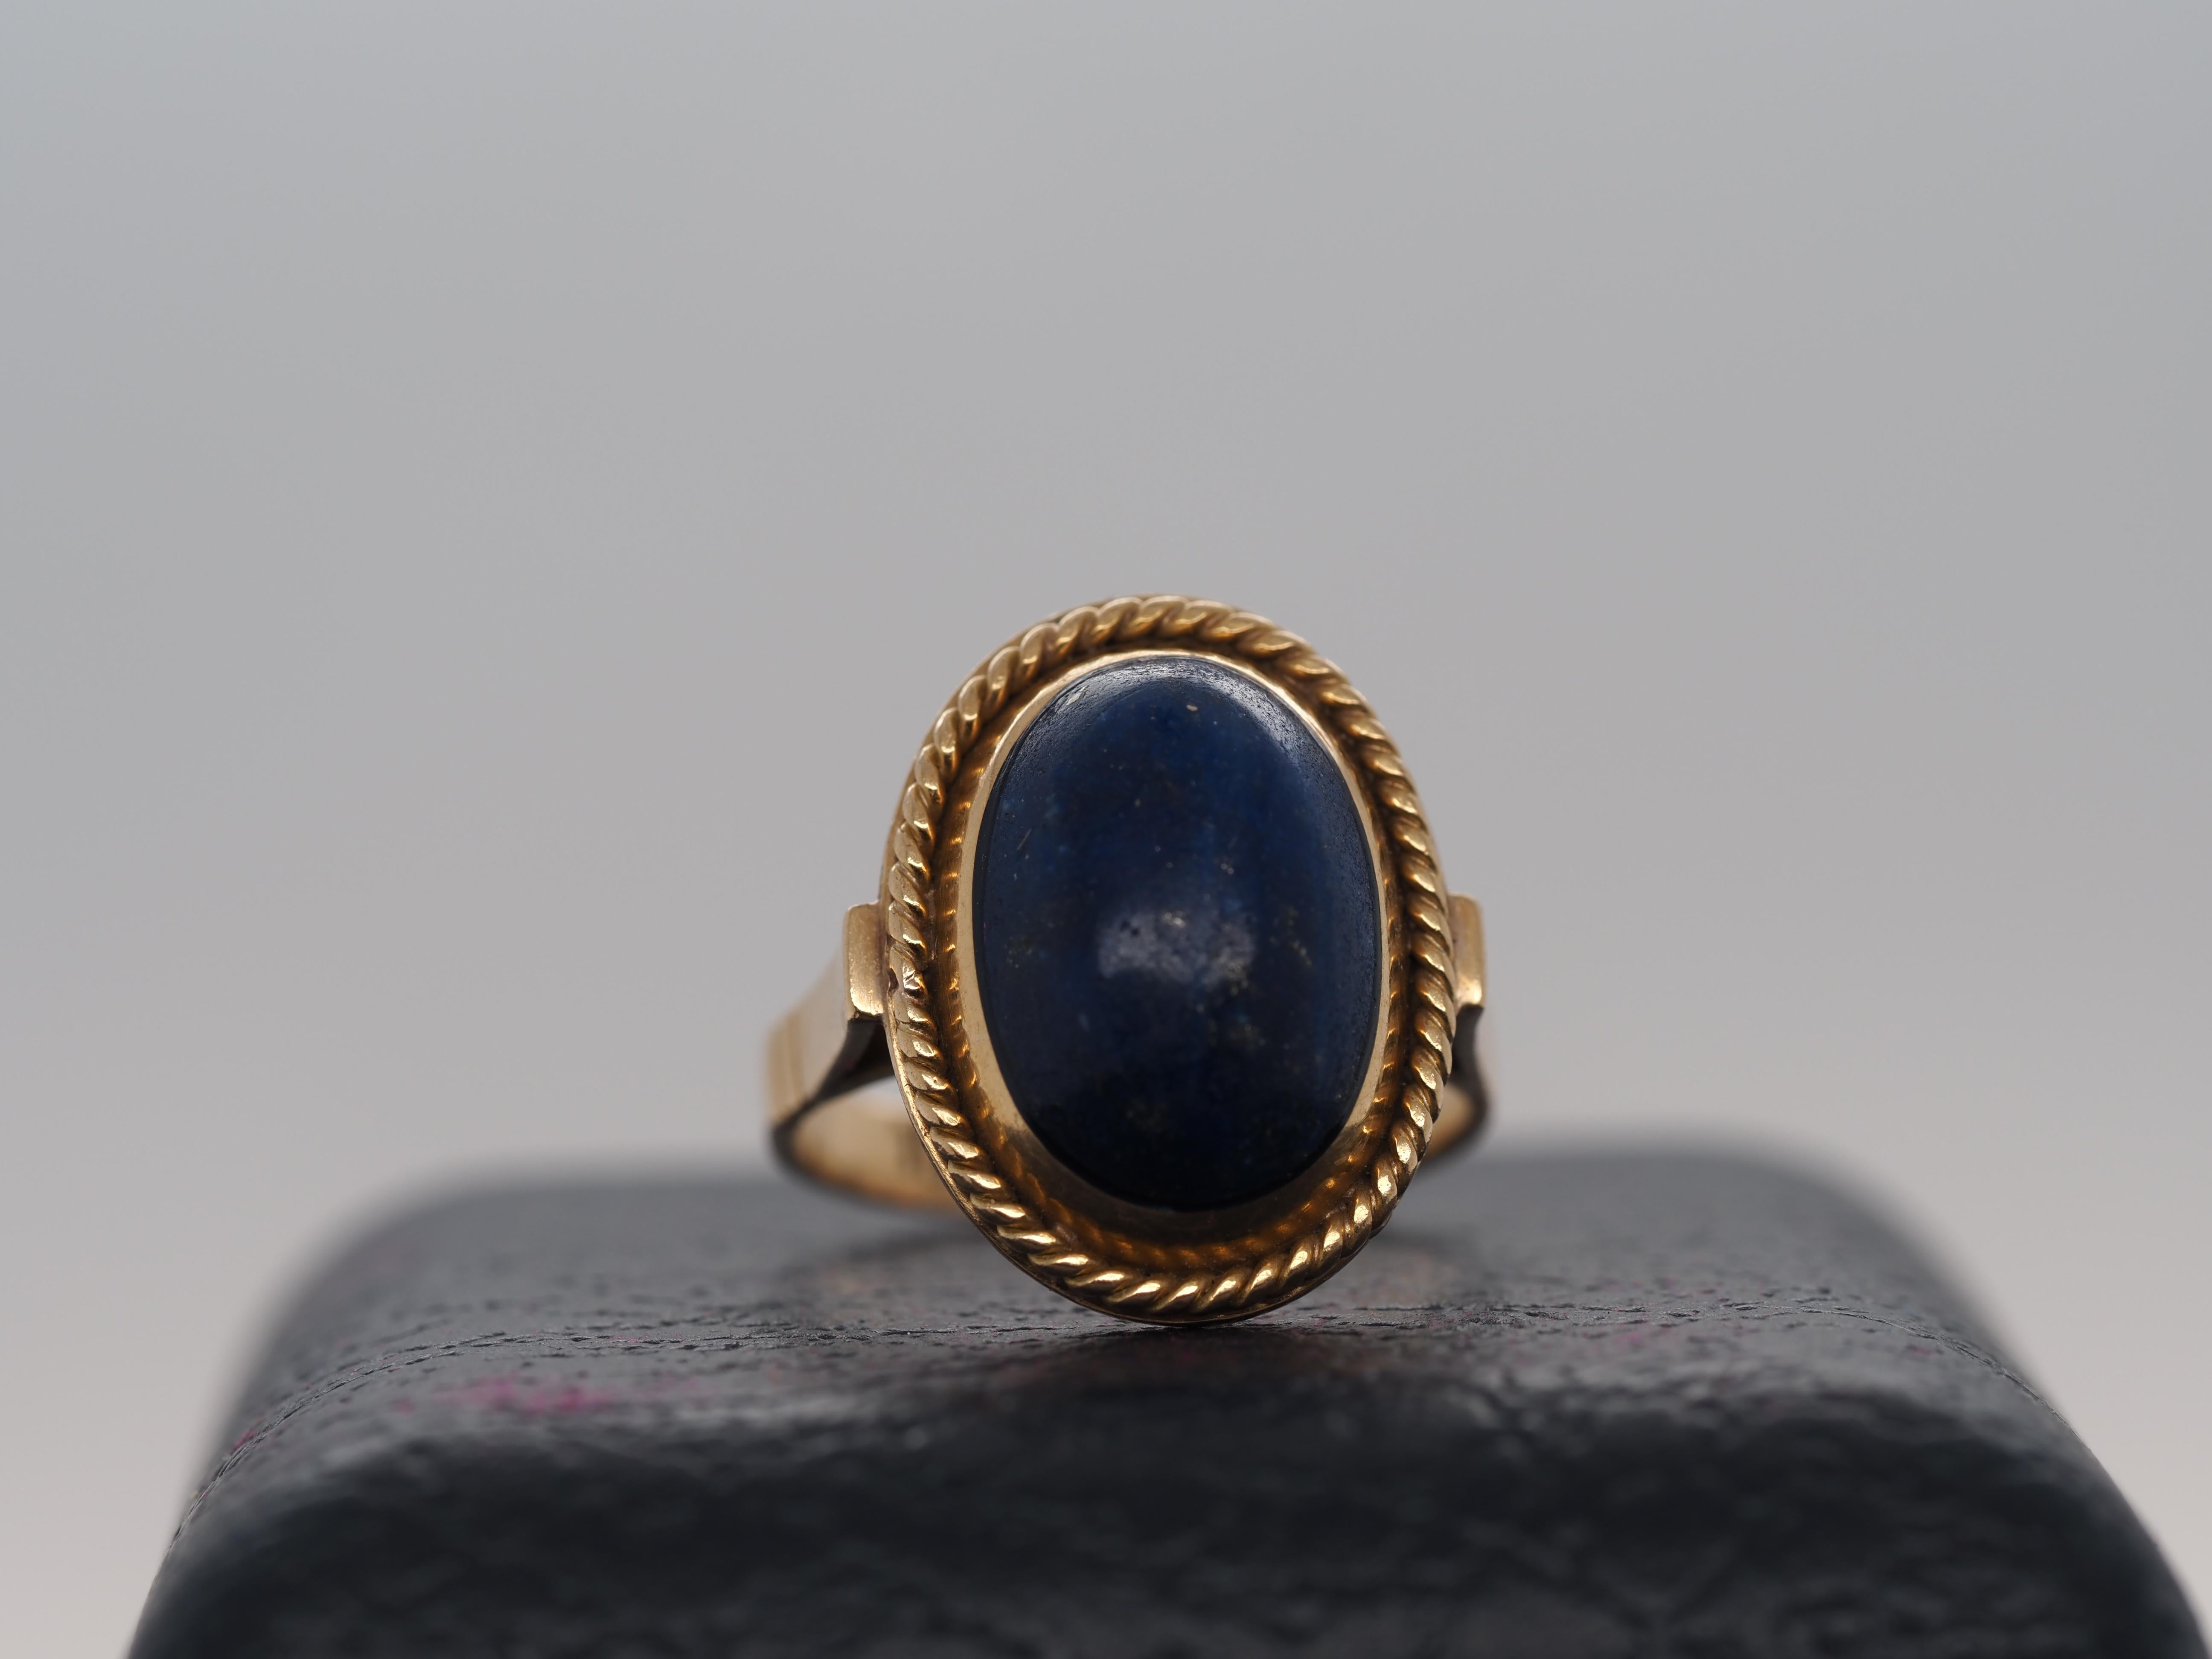 Item Details:
Ring Size: 4.25
Metal Type: 19K Yellow Gold [Hallmarked, and Tested]
Weight: 4.2 grams
Center Stone: Lapis , 12.5x9mm, Blue, Oval cabochon shape
Band Width: 2.3mm
Condition: Excellent